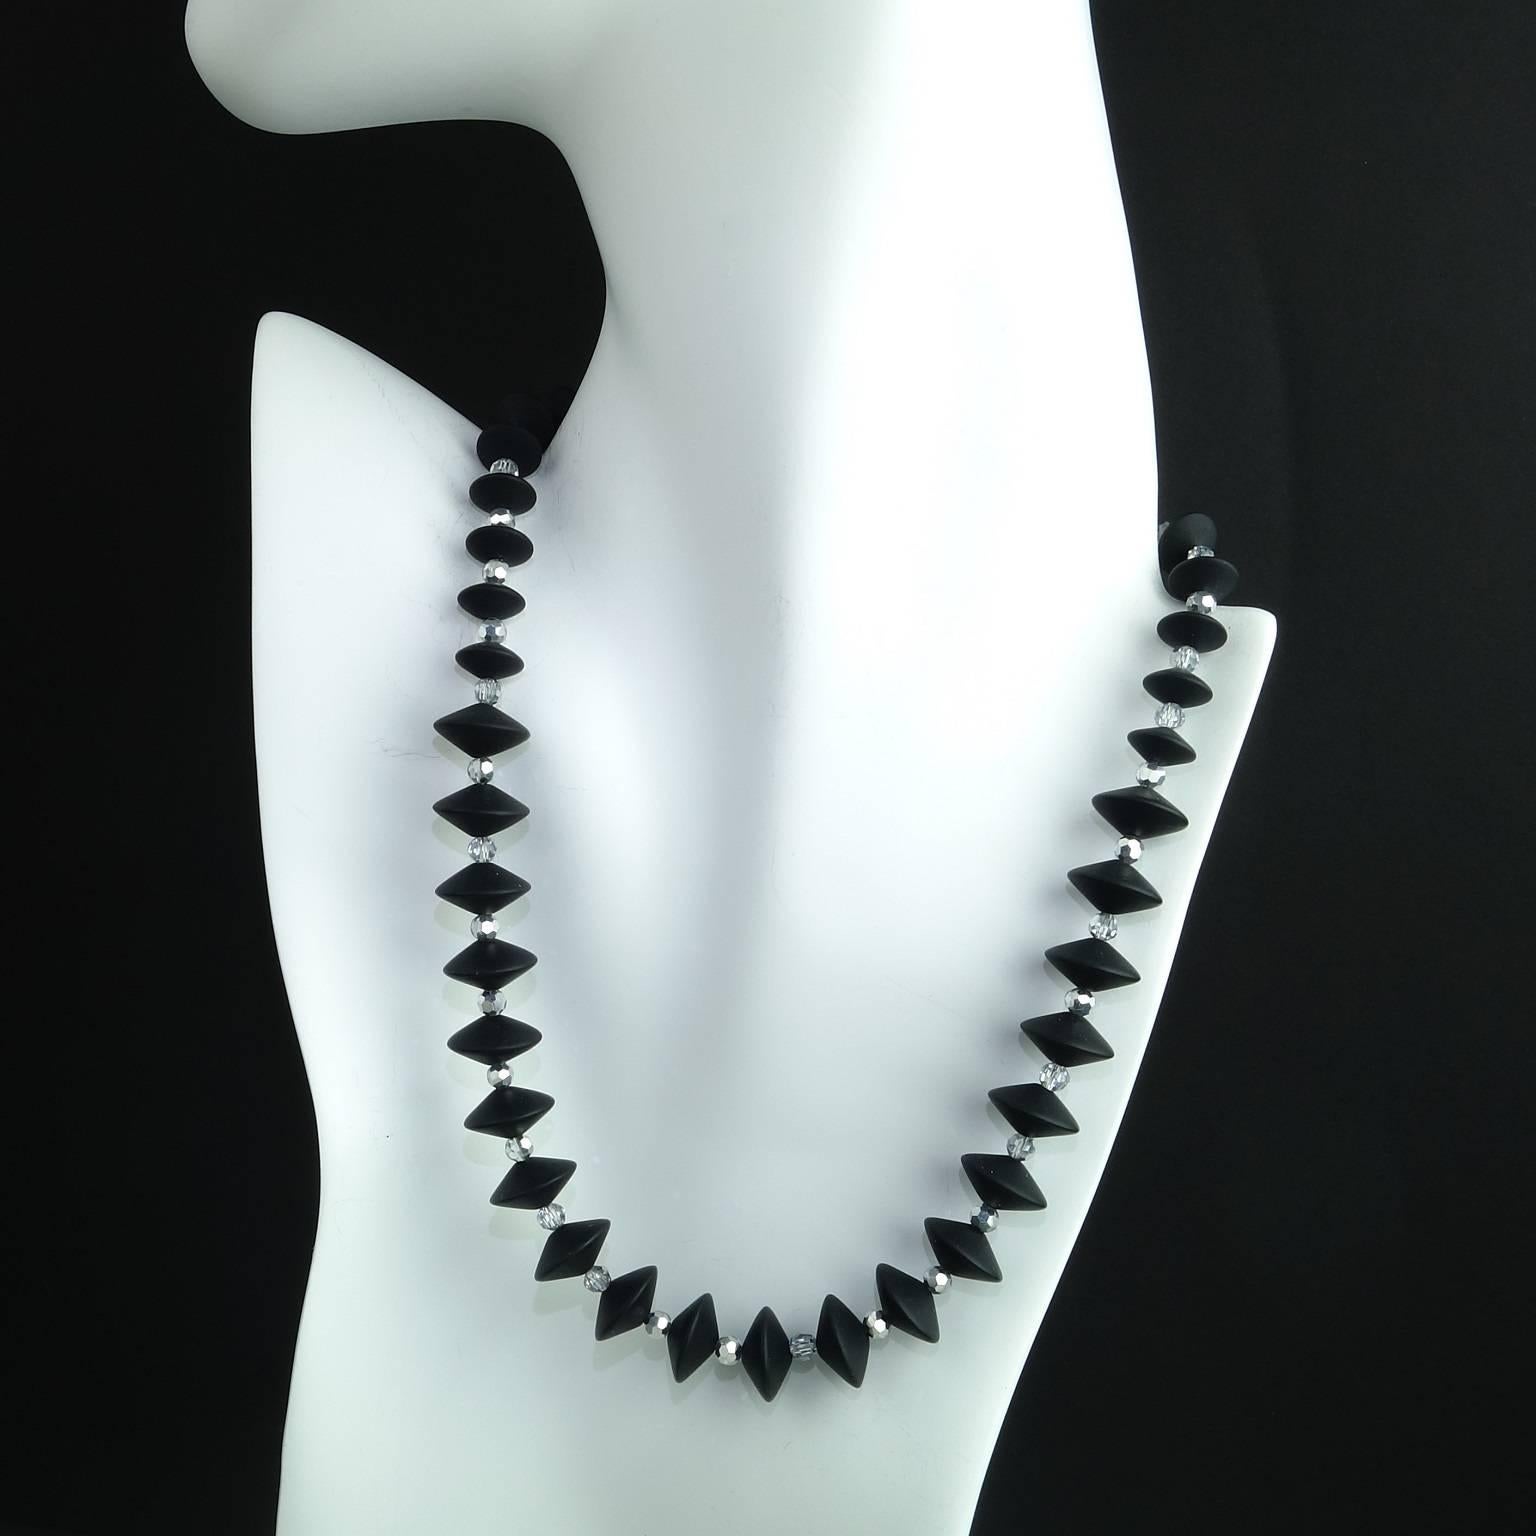 Sparkling Holiday necklace of two sizes of brushed elongated onyx rondels, 14mm and 10mm. alternating with sparkling faceted silver crystals (4mm). This necklace sparkles and pops, black and silver, terrific for the Holidays. It is 17 inches in